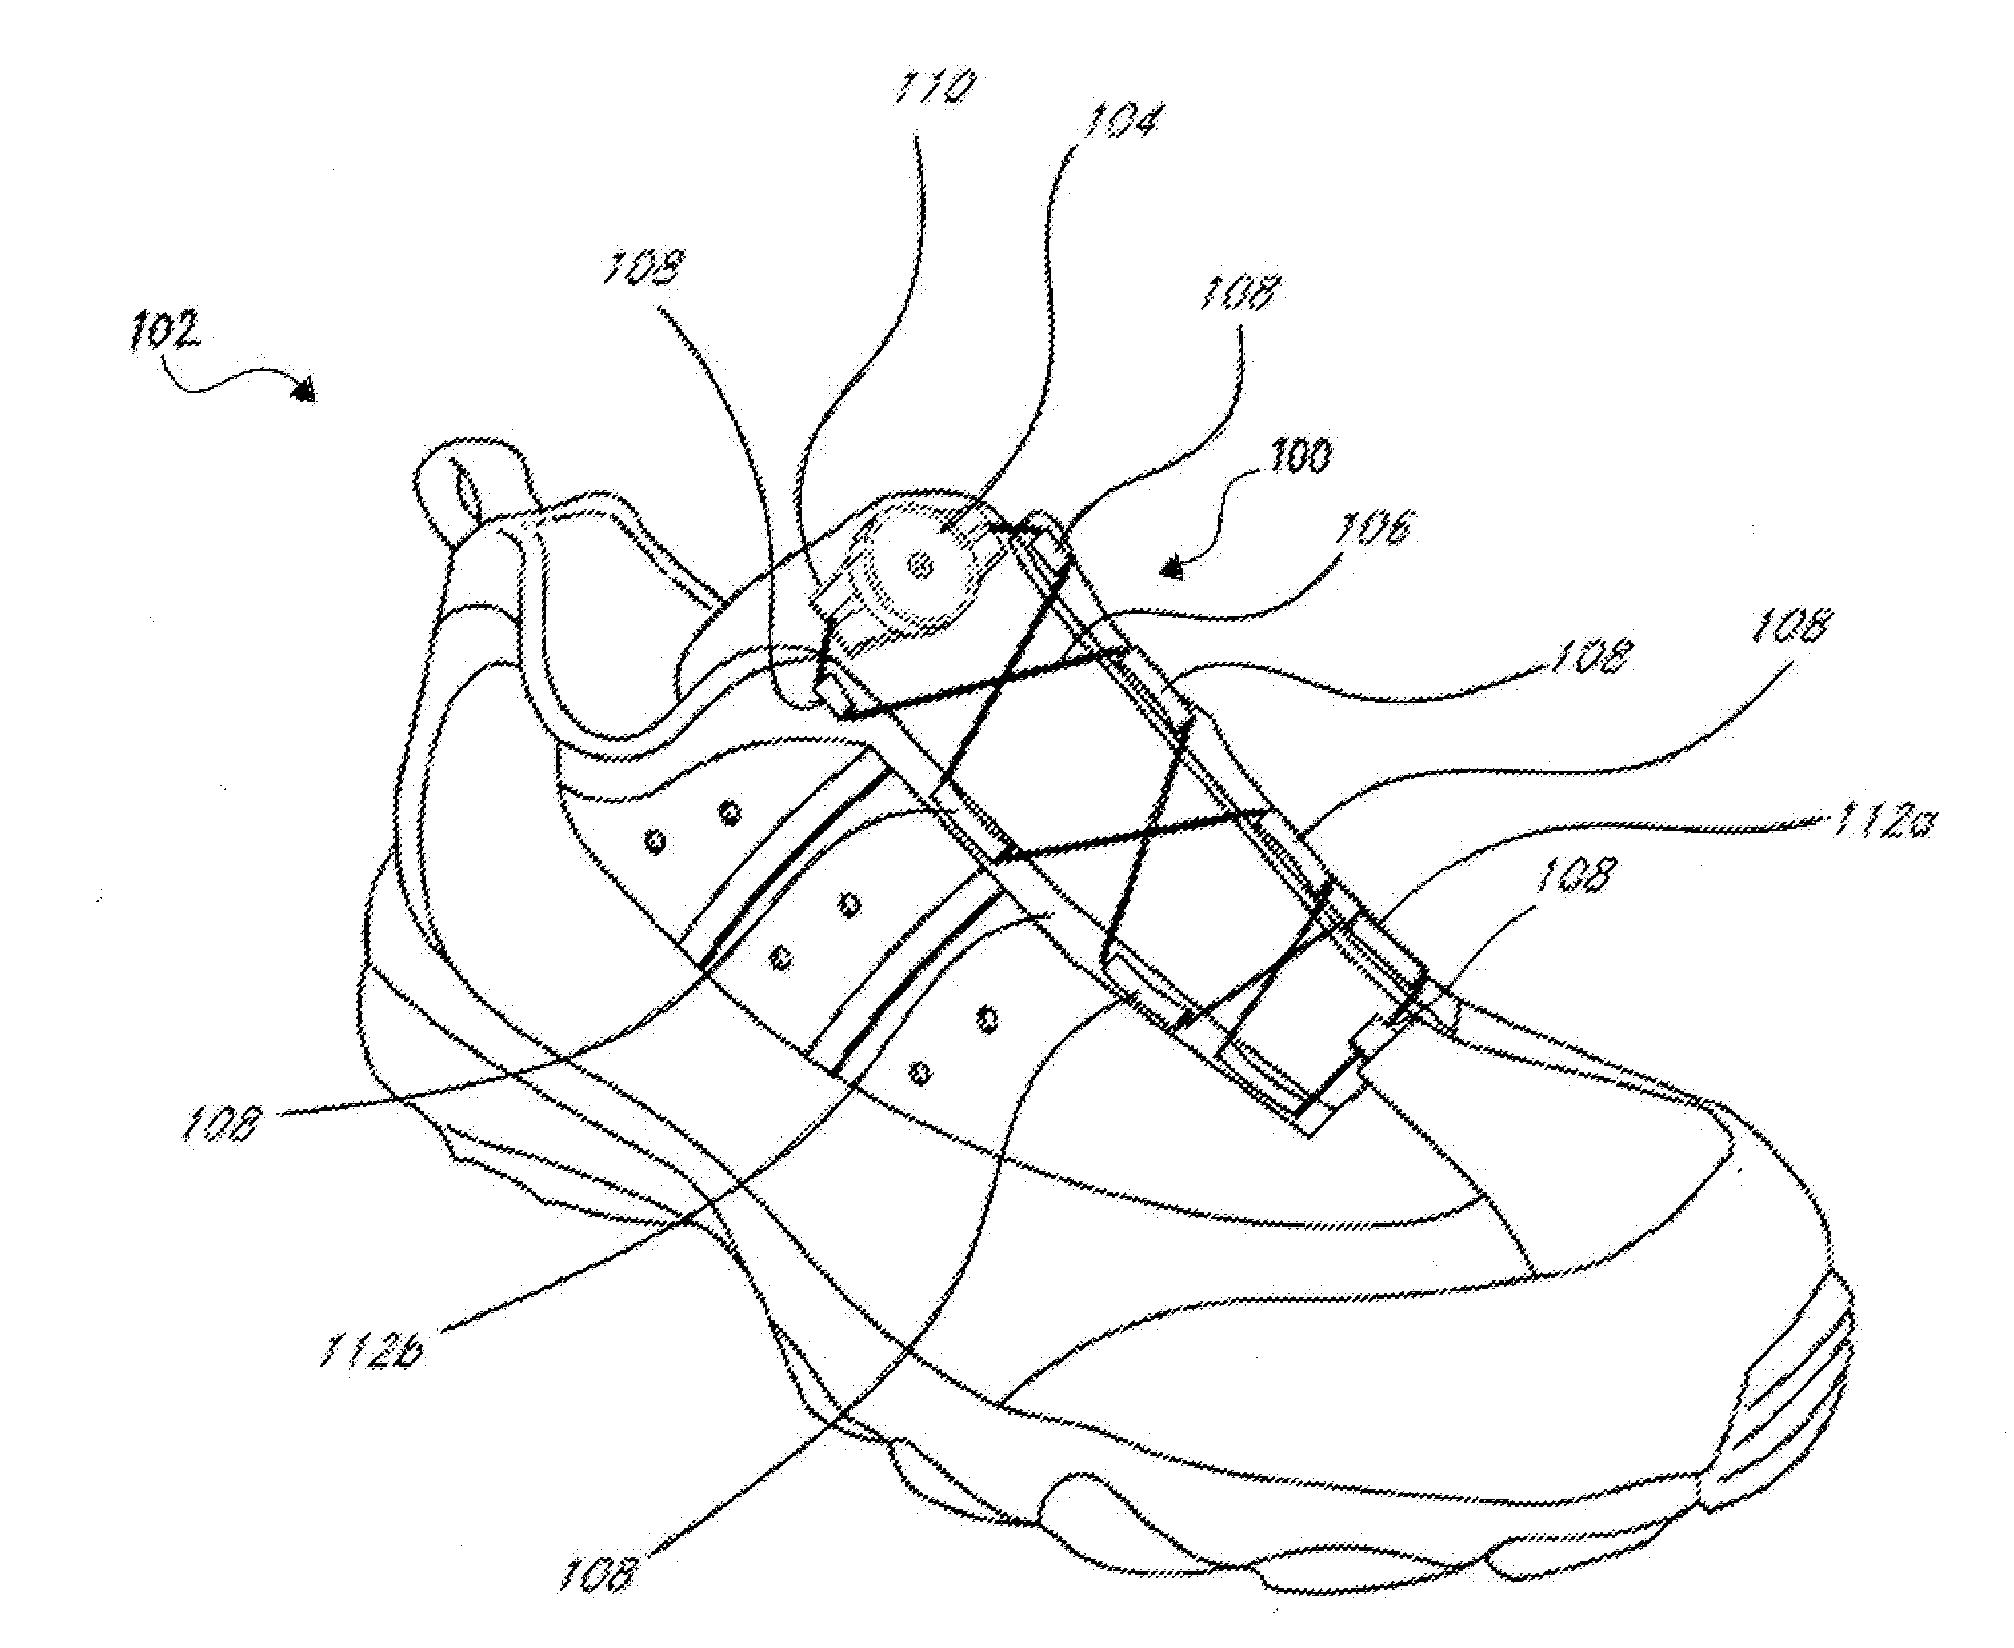 Methods and devices for retrofitting footwear to include a reel based closure system